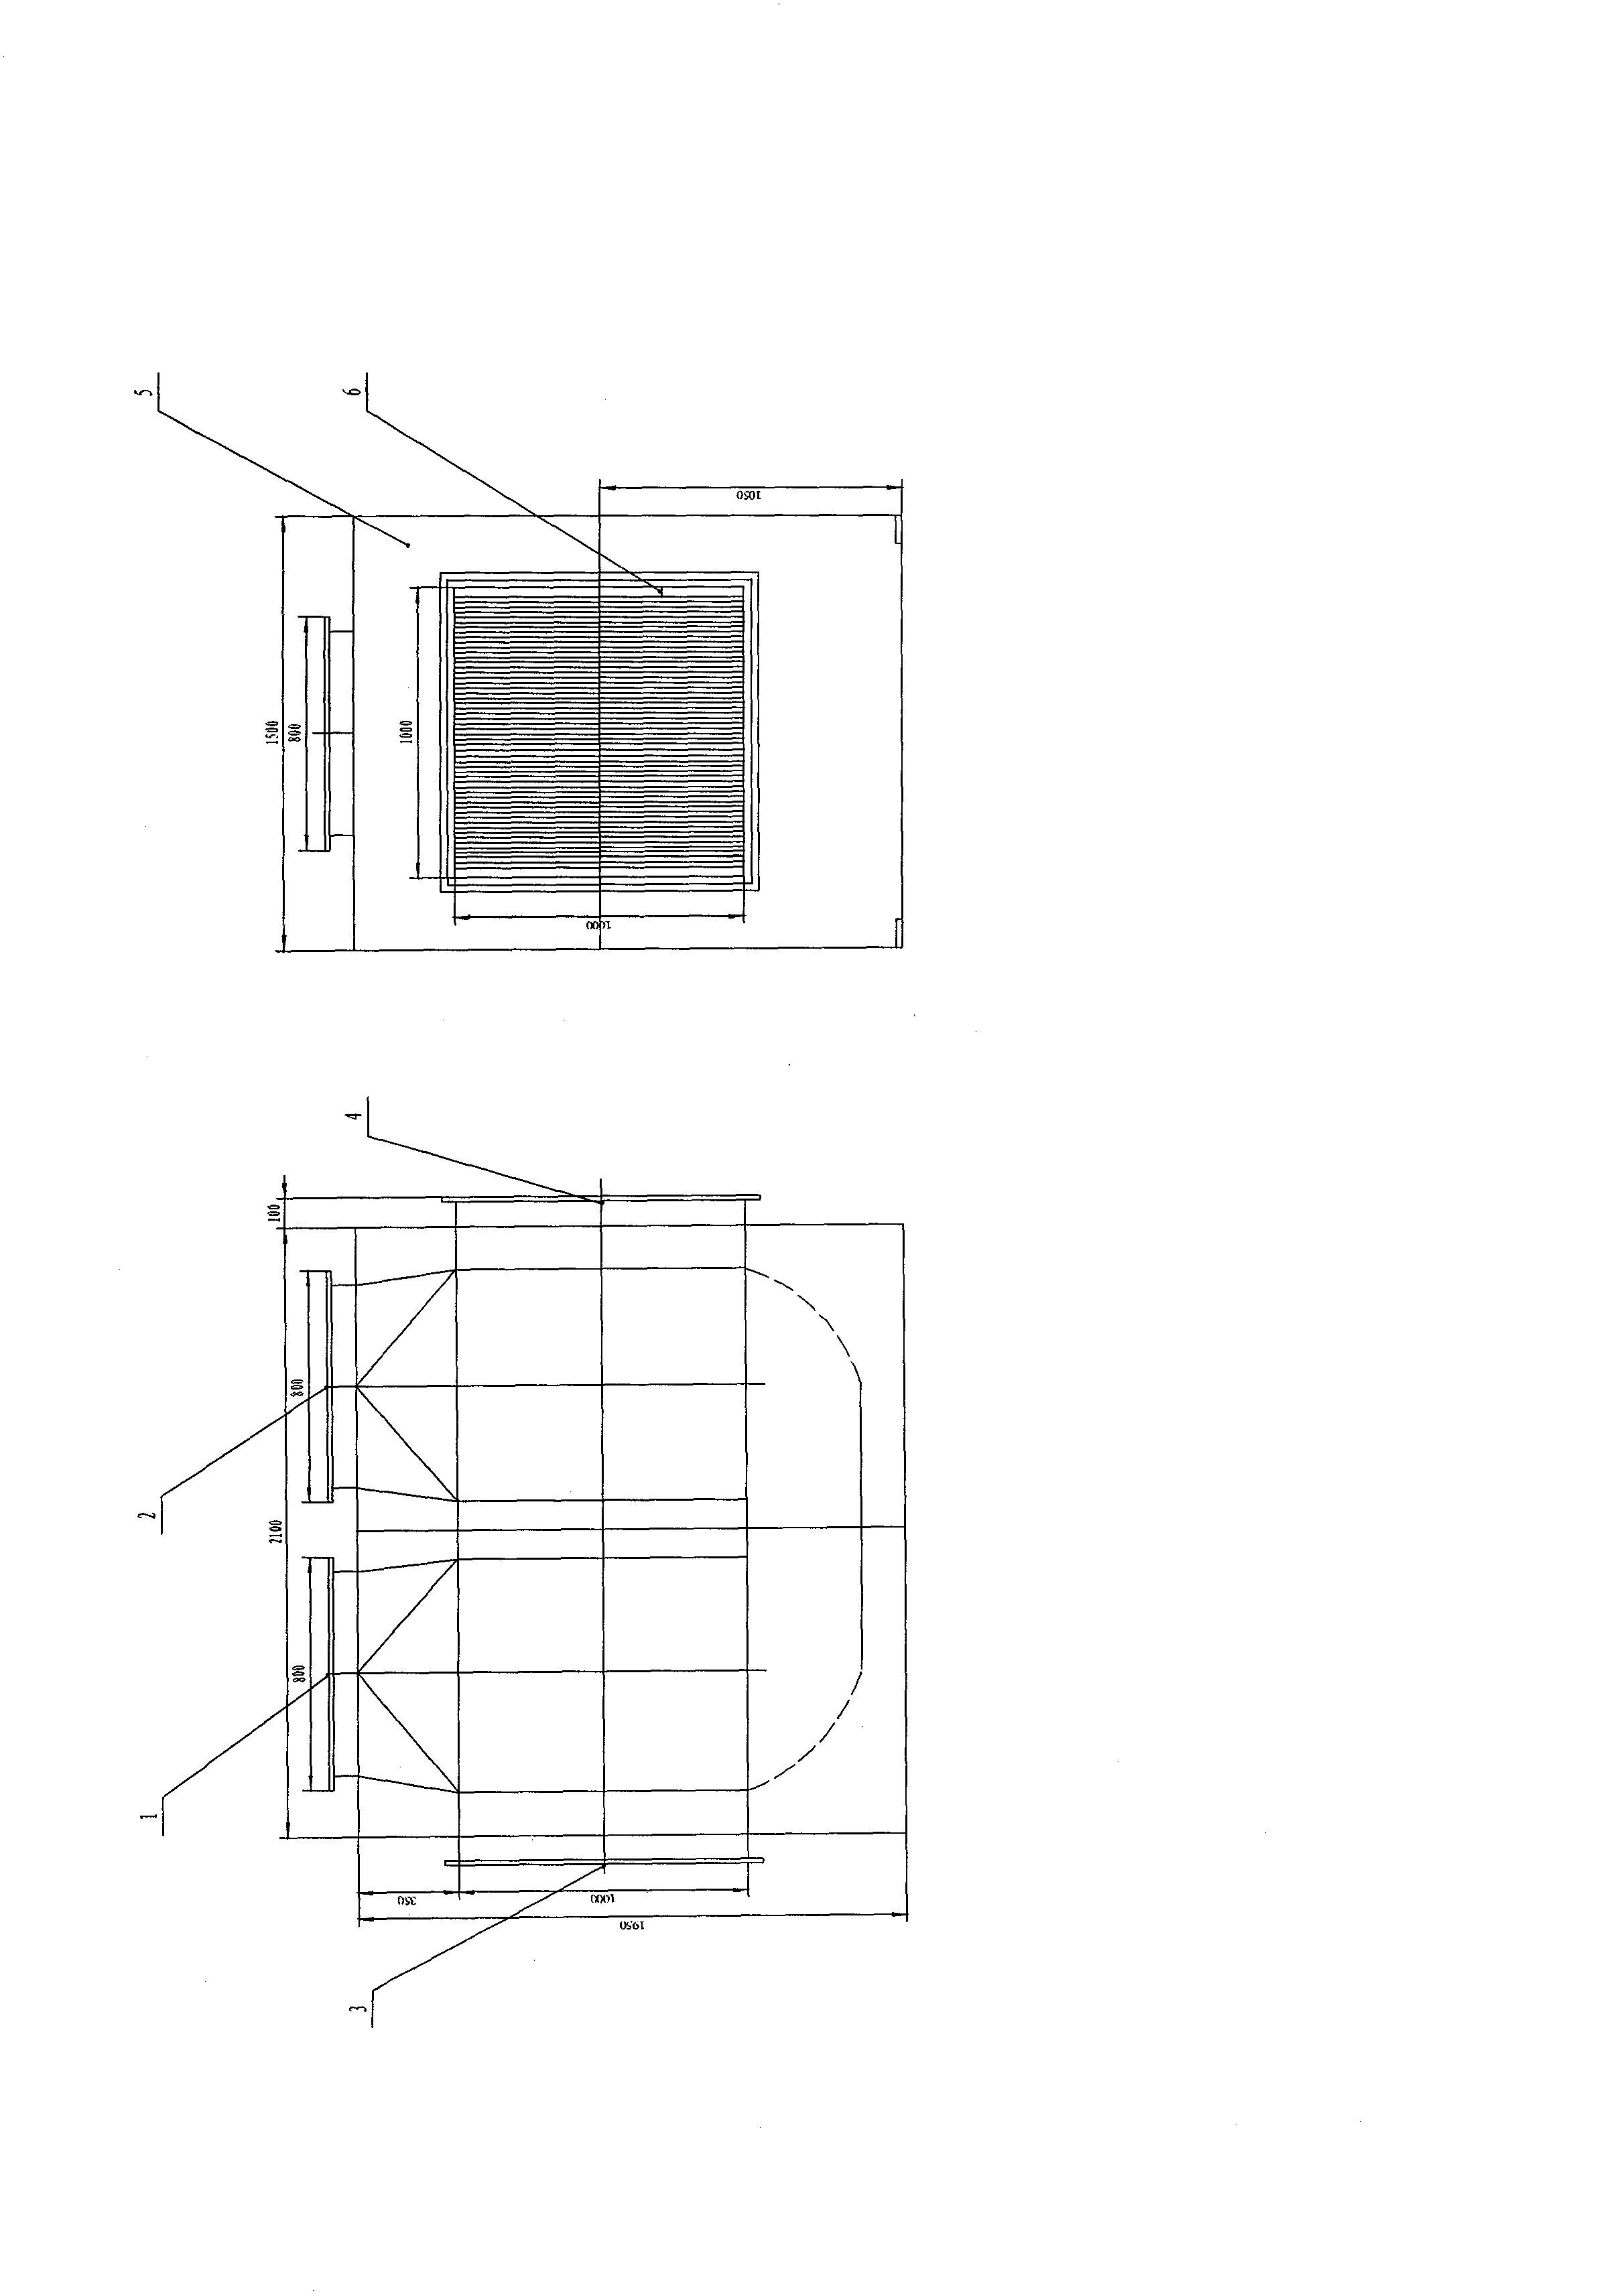 Plate and tube type heat exchanger